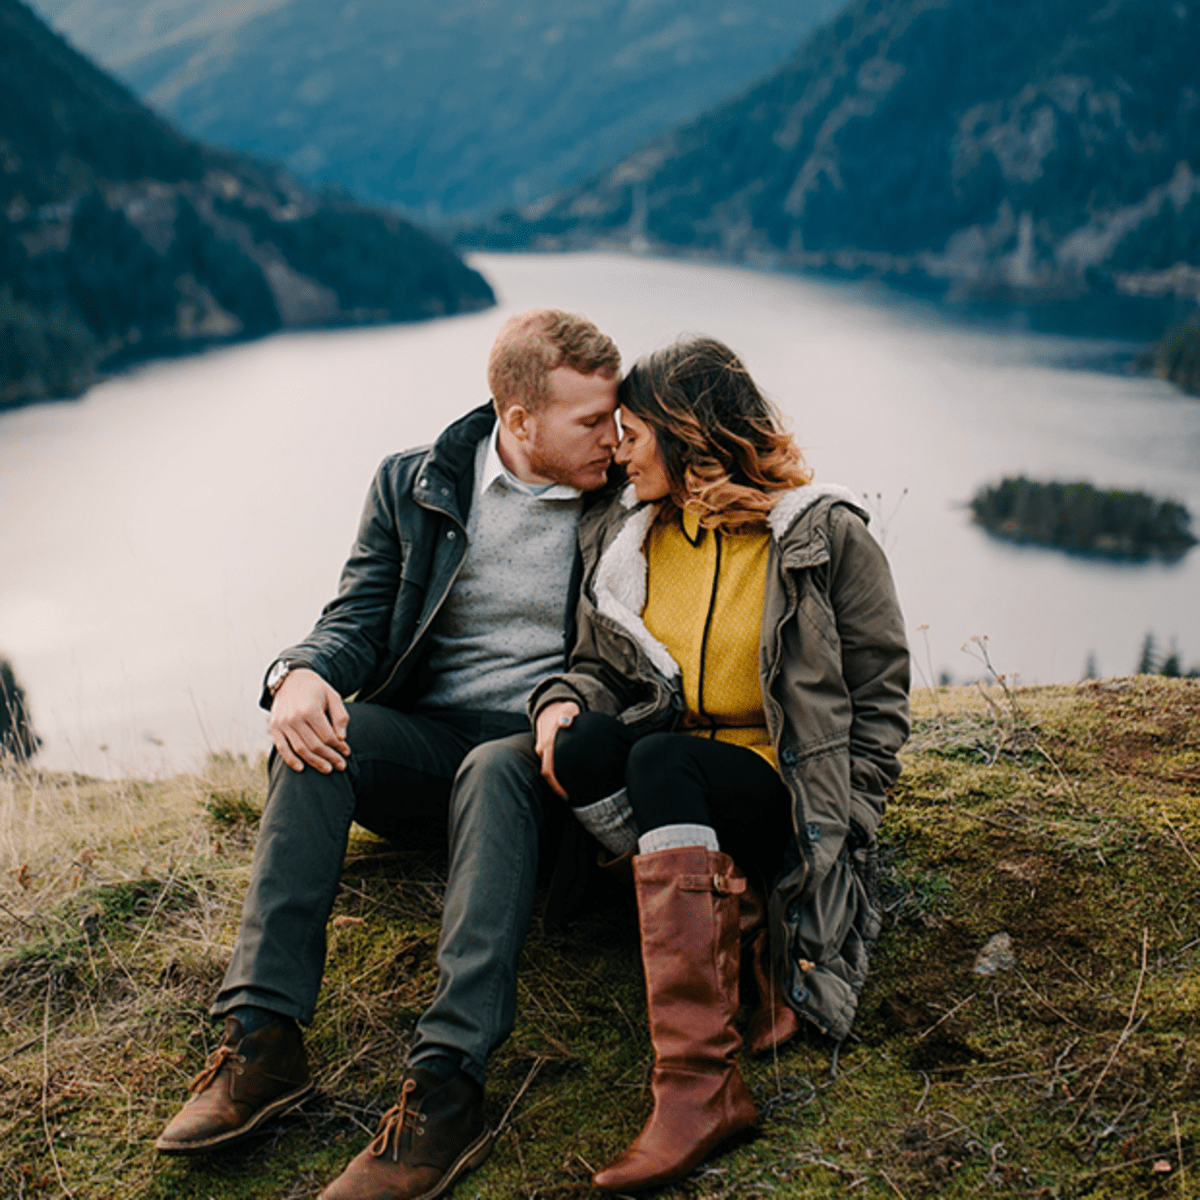 Cute Date Ideas for Fall That Will Refresh Your Relationship - Verily